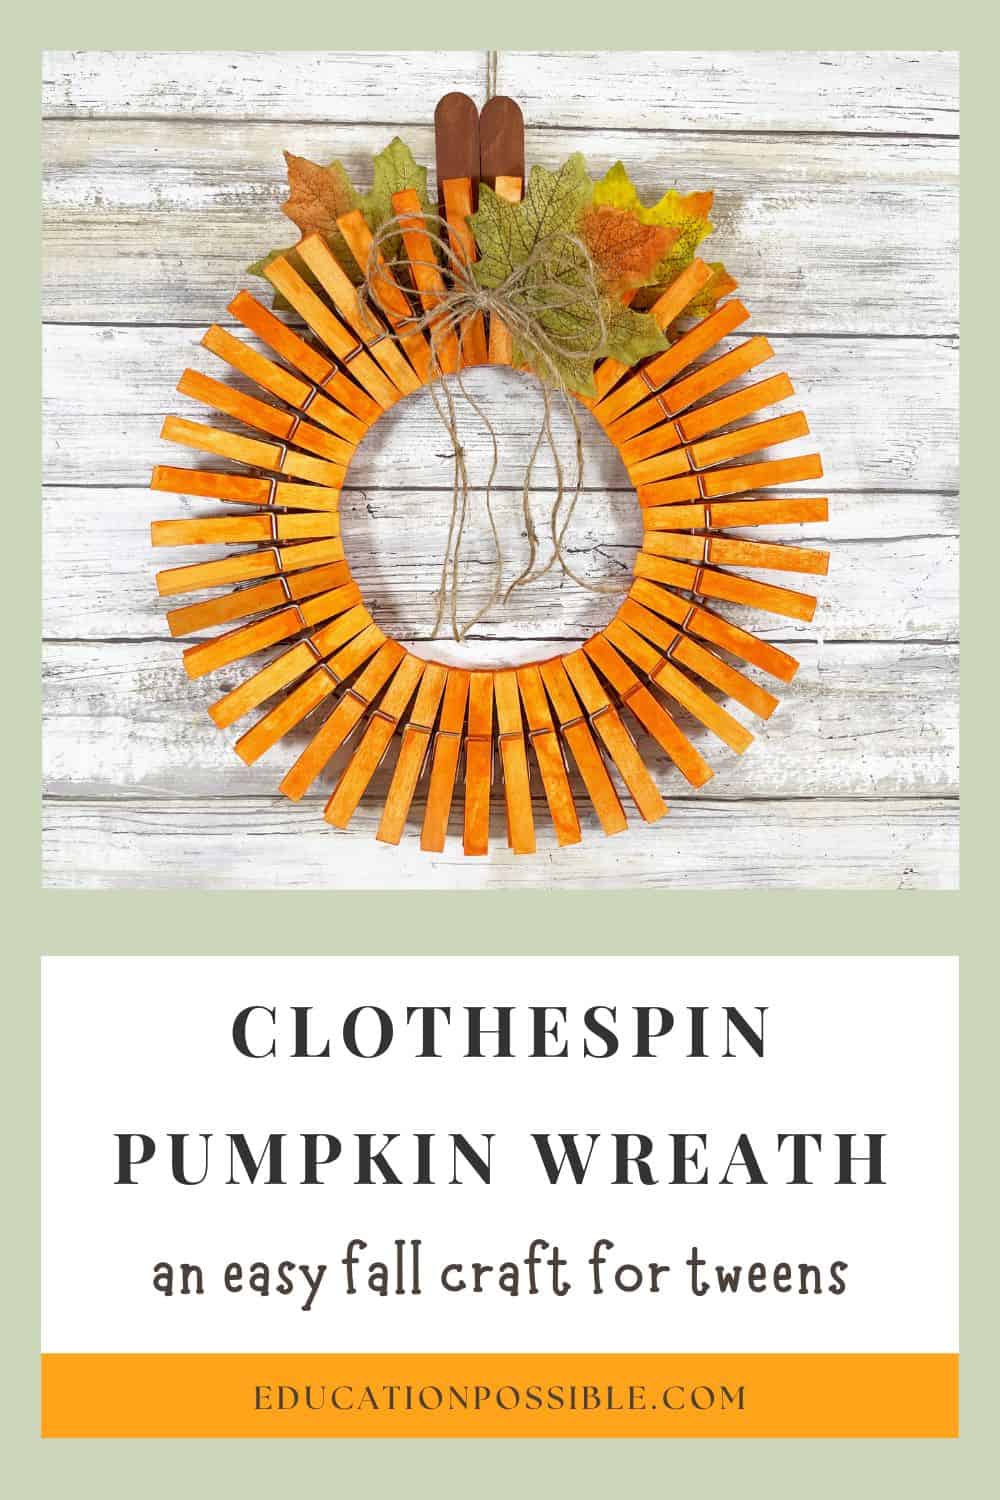 DIY clothespin pumpkin wreath craft completed and hanging on a wall